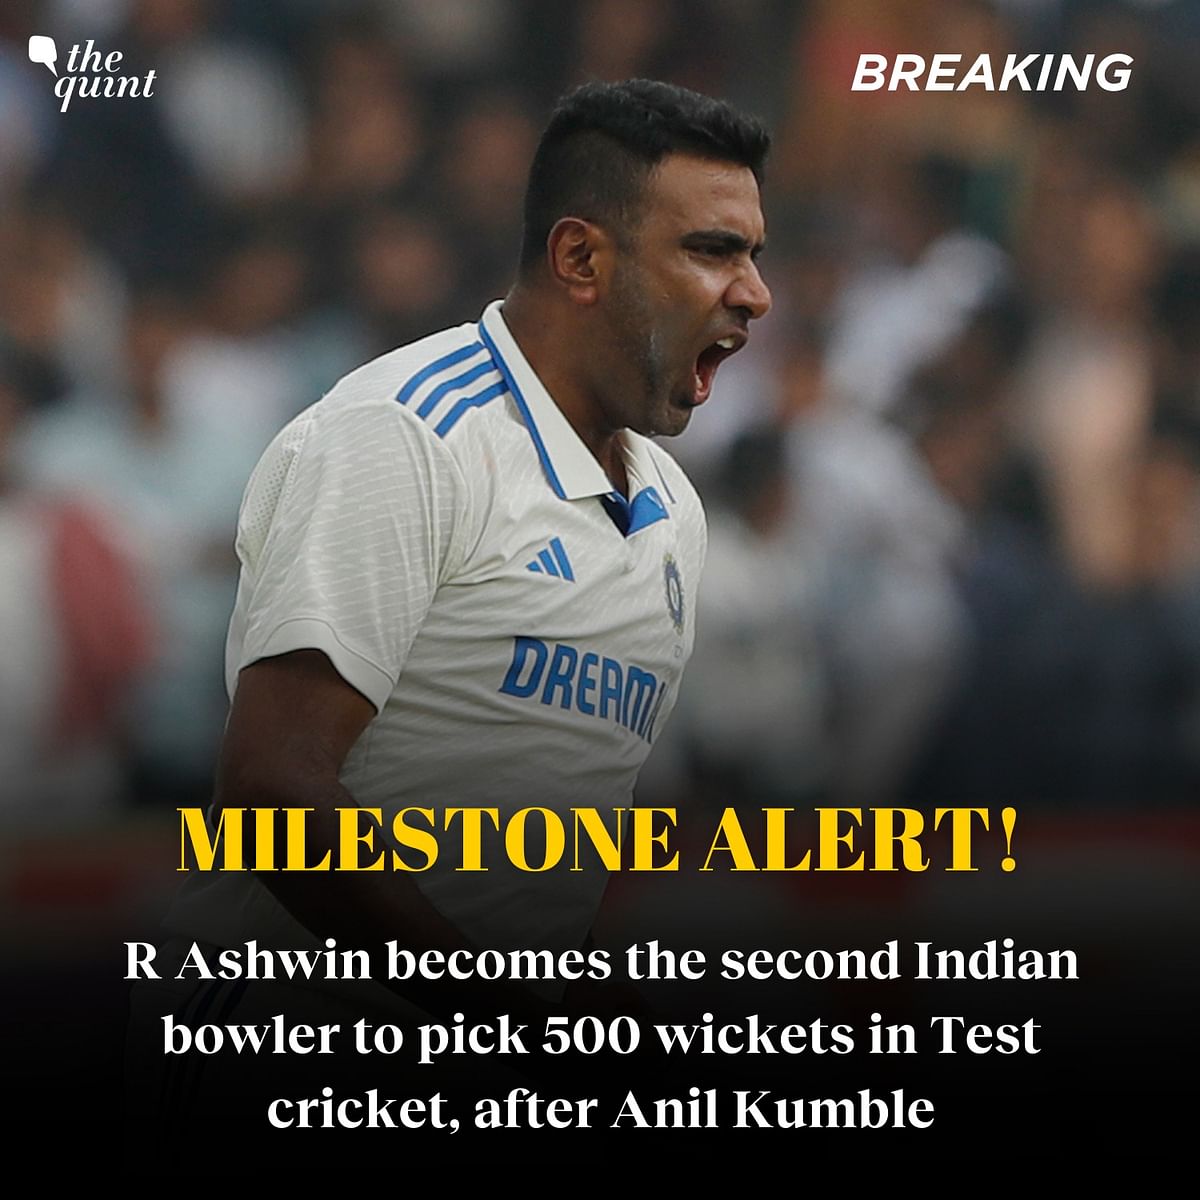 #IndvsEng | R Ashwin becomes the second Indian after Anil Kumble to take 500 Test wickets in international cricket.